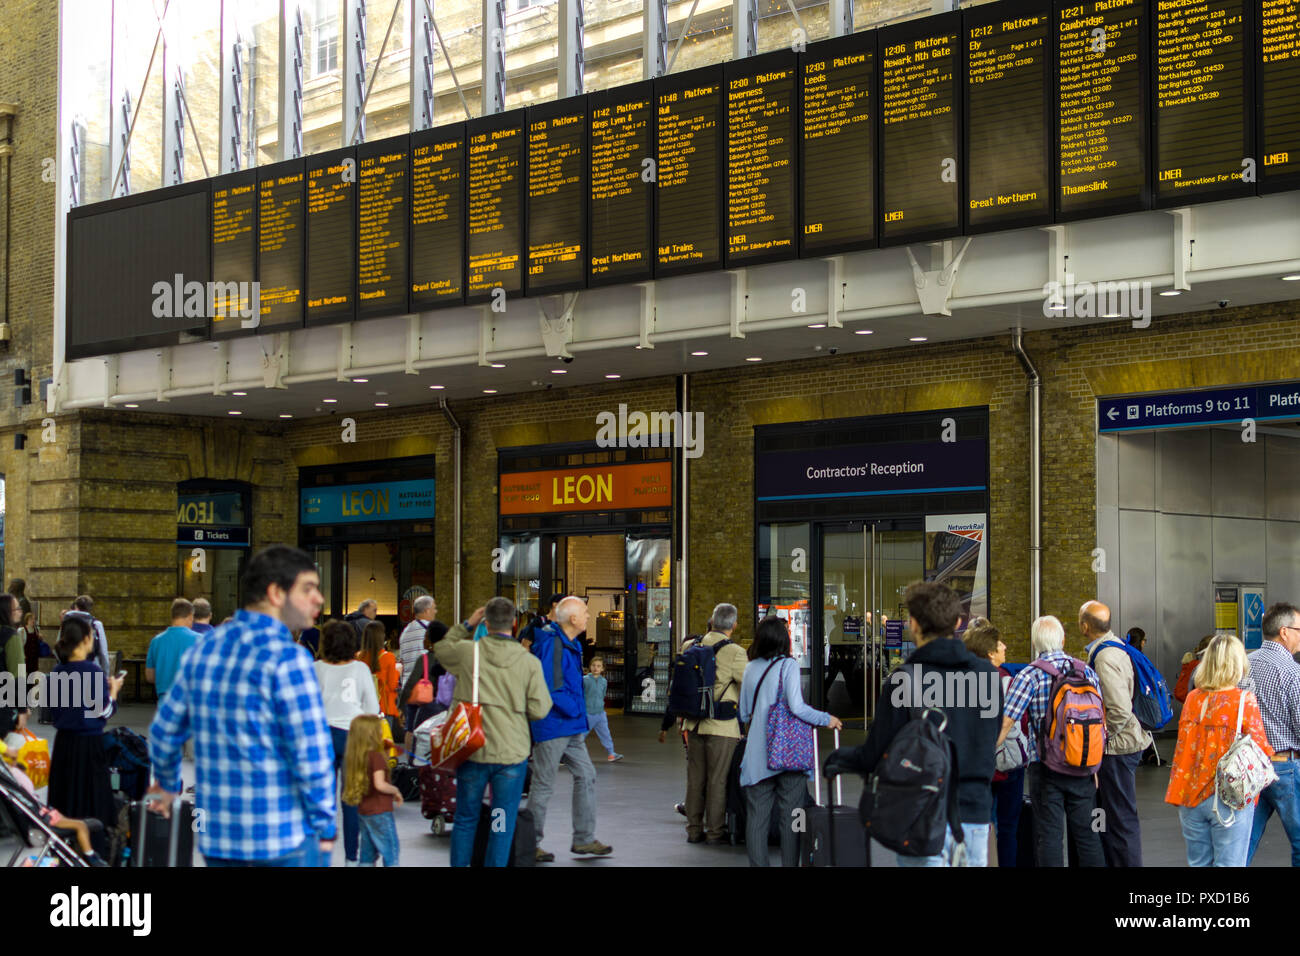 Commuters standing looking at the main electronic train noticeboards in the concourse of King's Cross station, London, UK Stock Photo